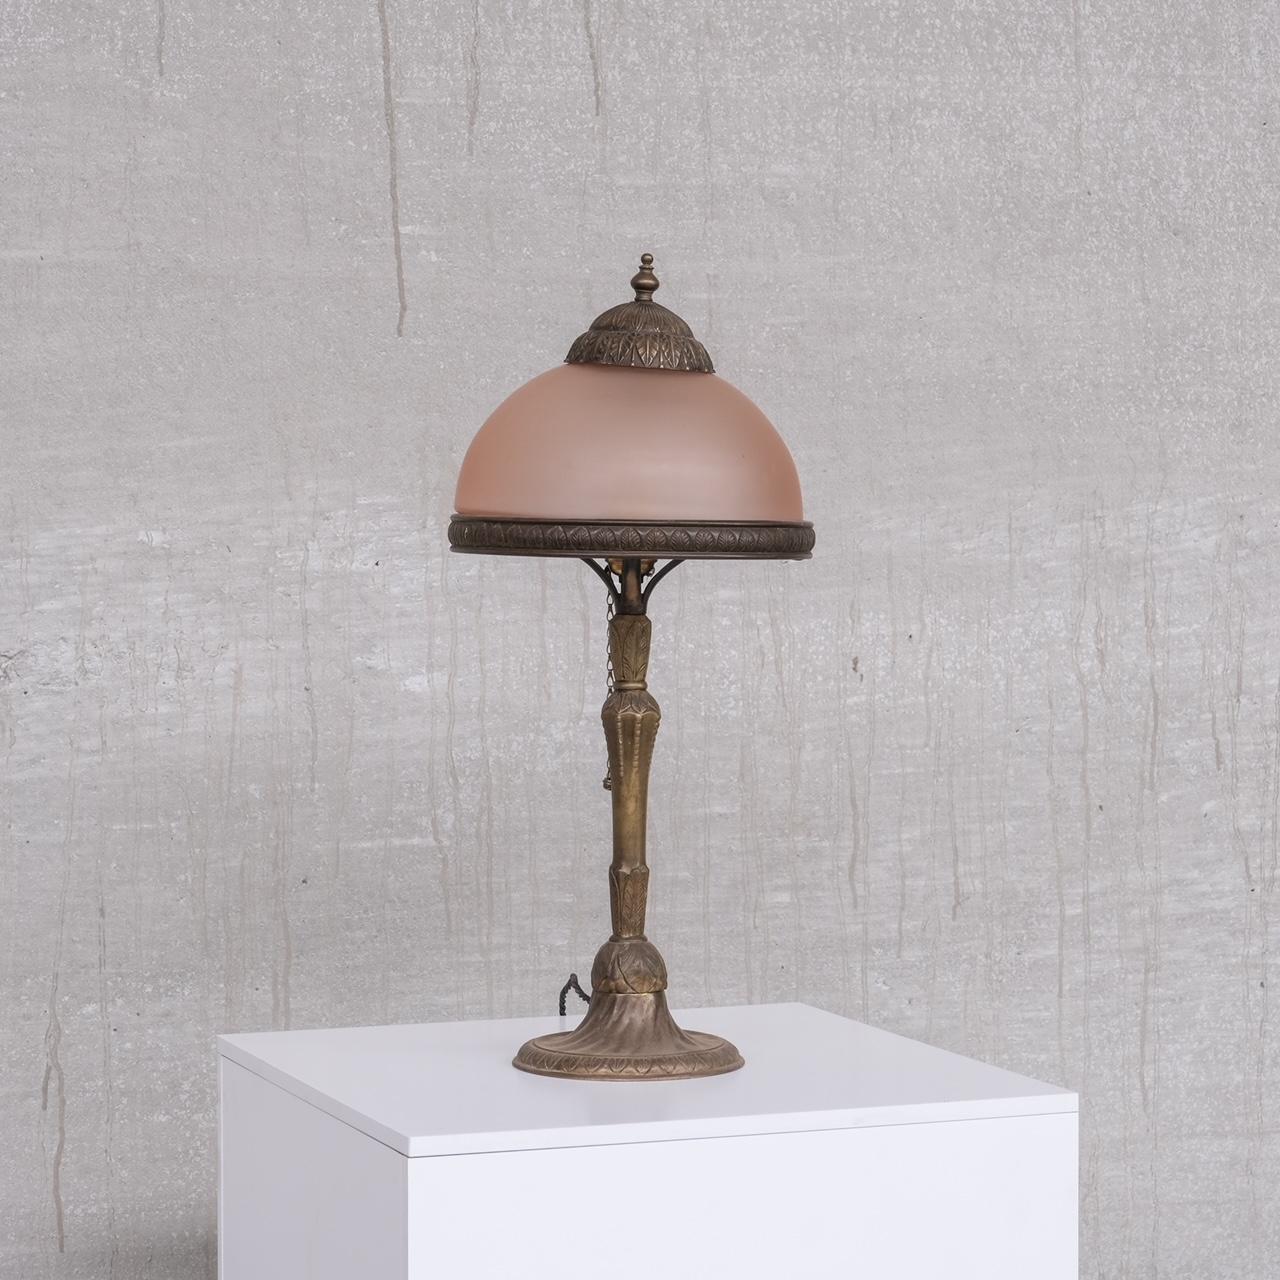 An Art Nouveau brass table lamp, with pink muted glass shade.

France, circa 1910s.

Good quality brass.

Re-wired and PAT tested.

Not a period we usually buy but this piece is particularly pleasing.

Location: Belgium